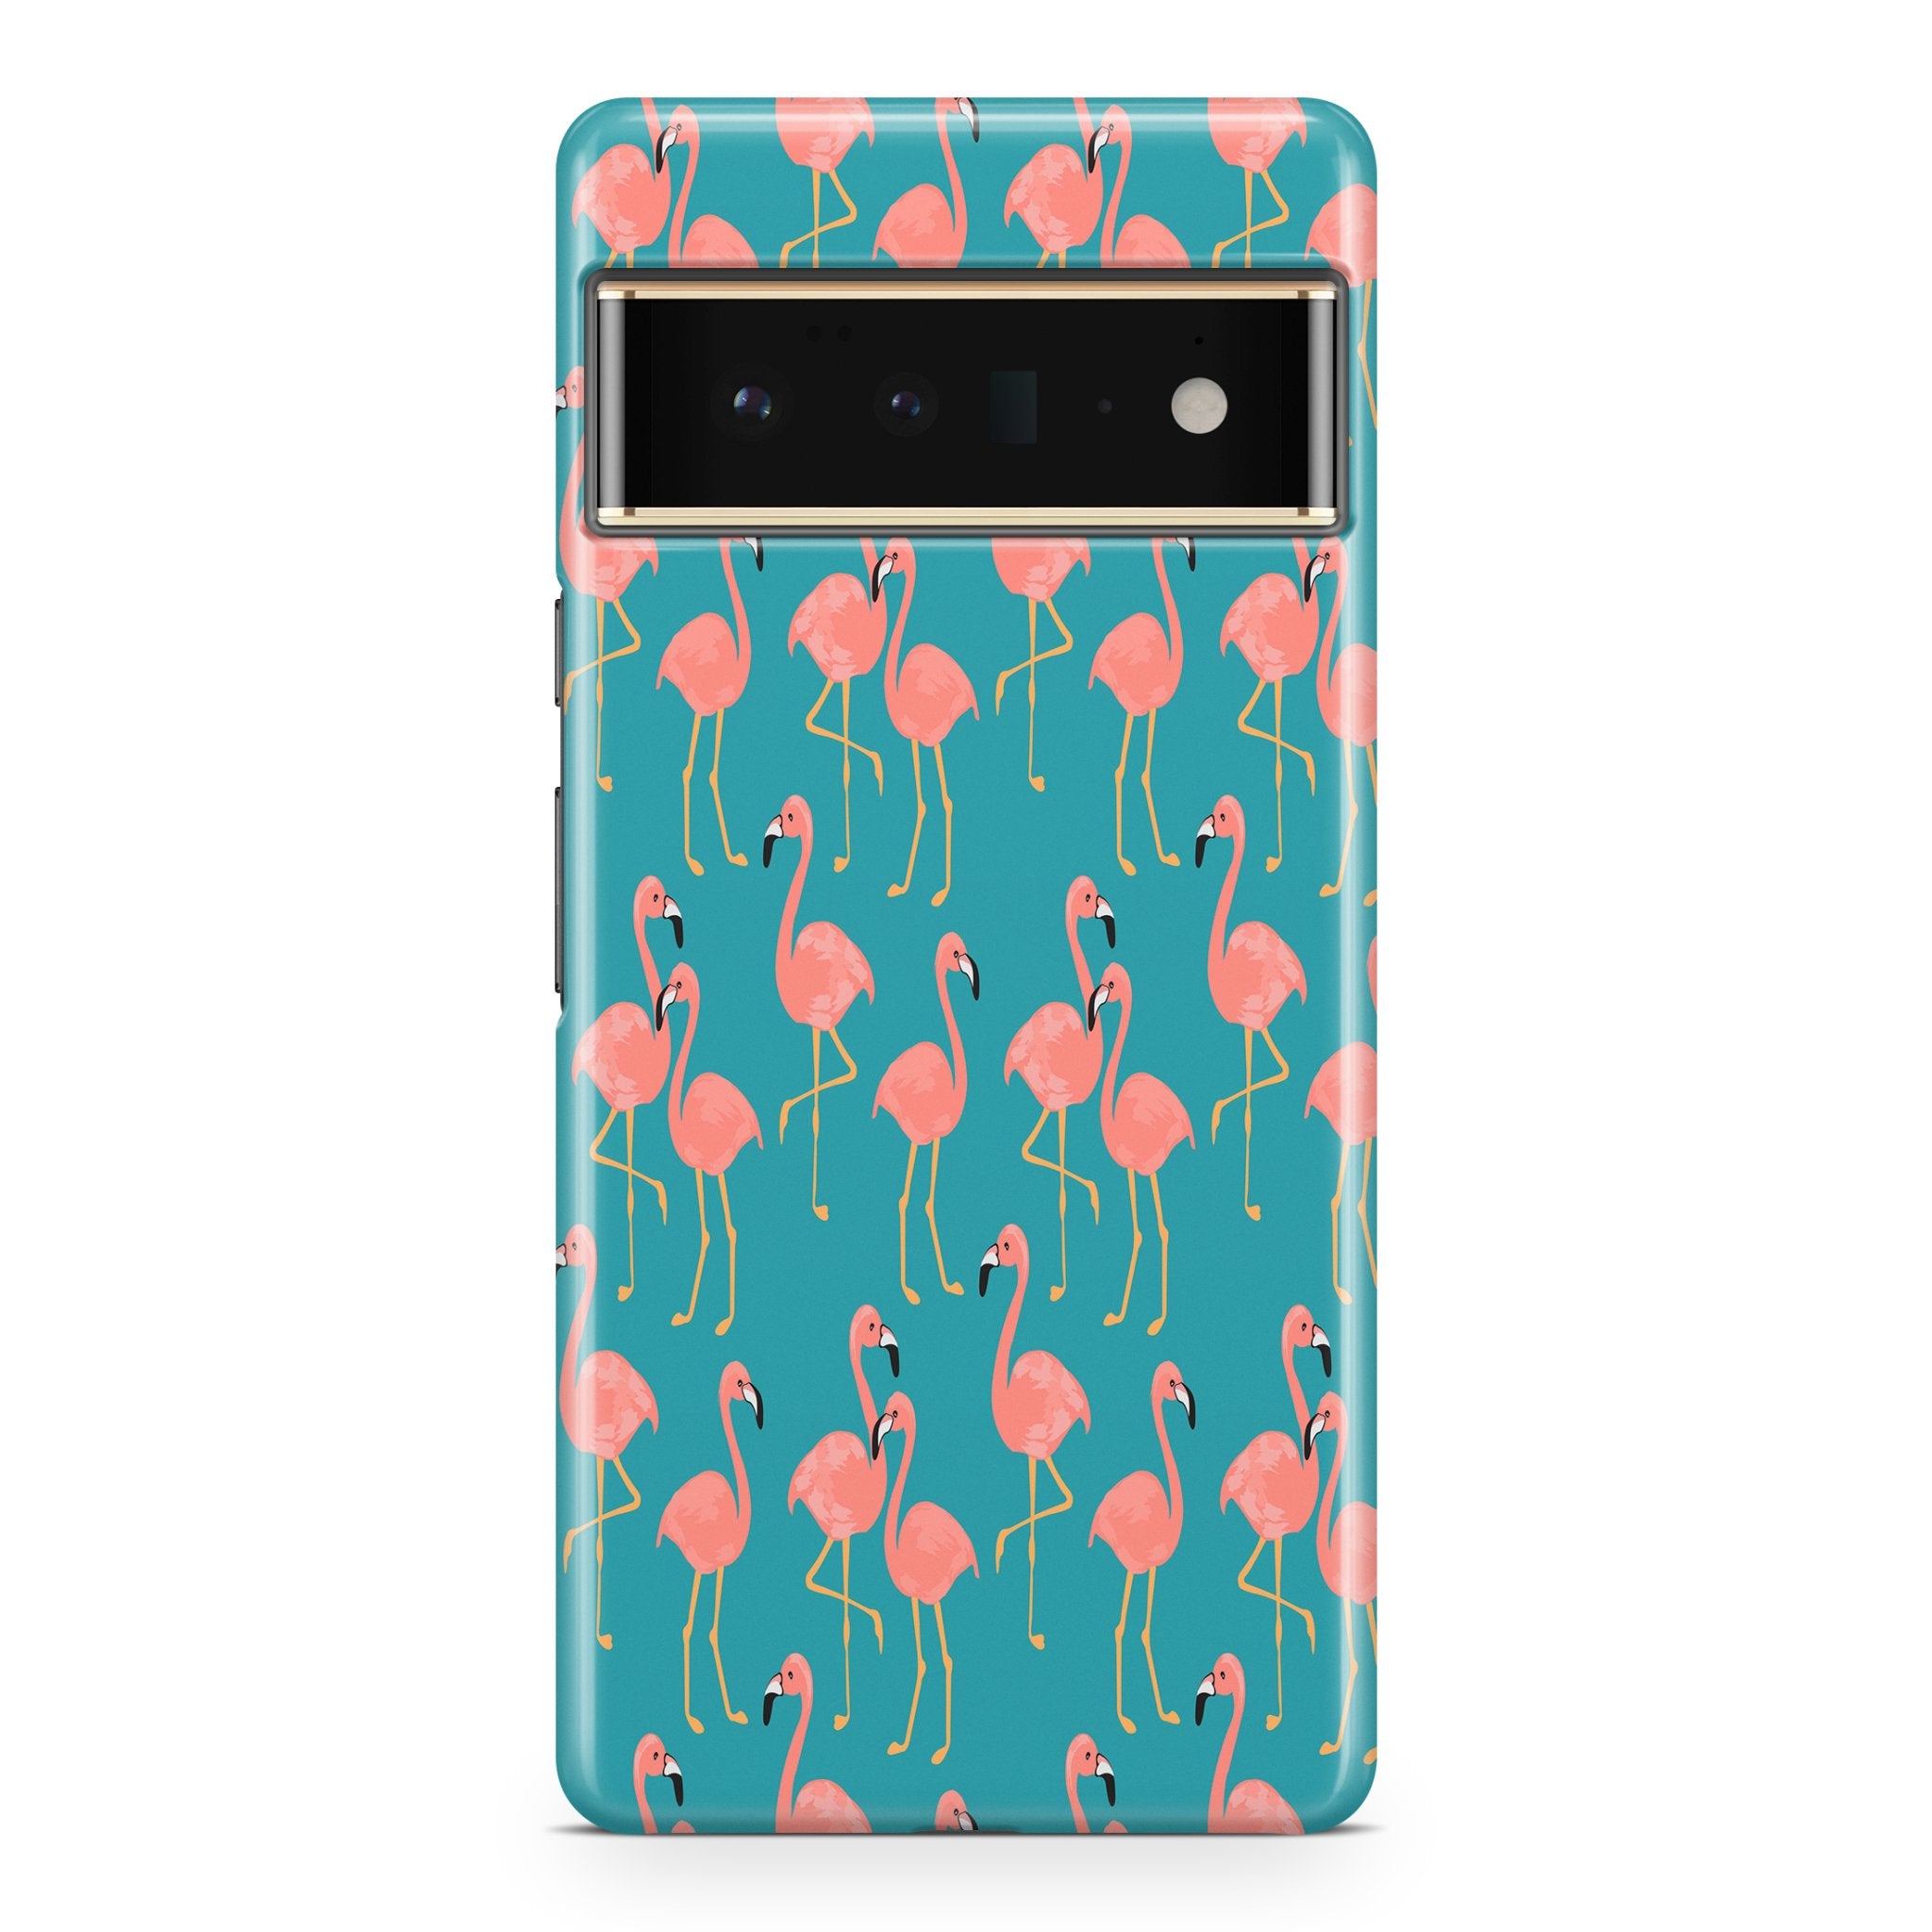 Flamingo Fiesta - Google phone case designs by CaseSwagger